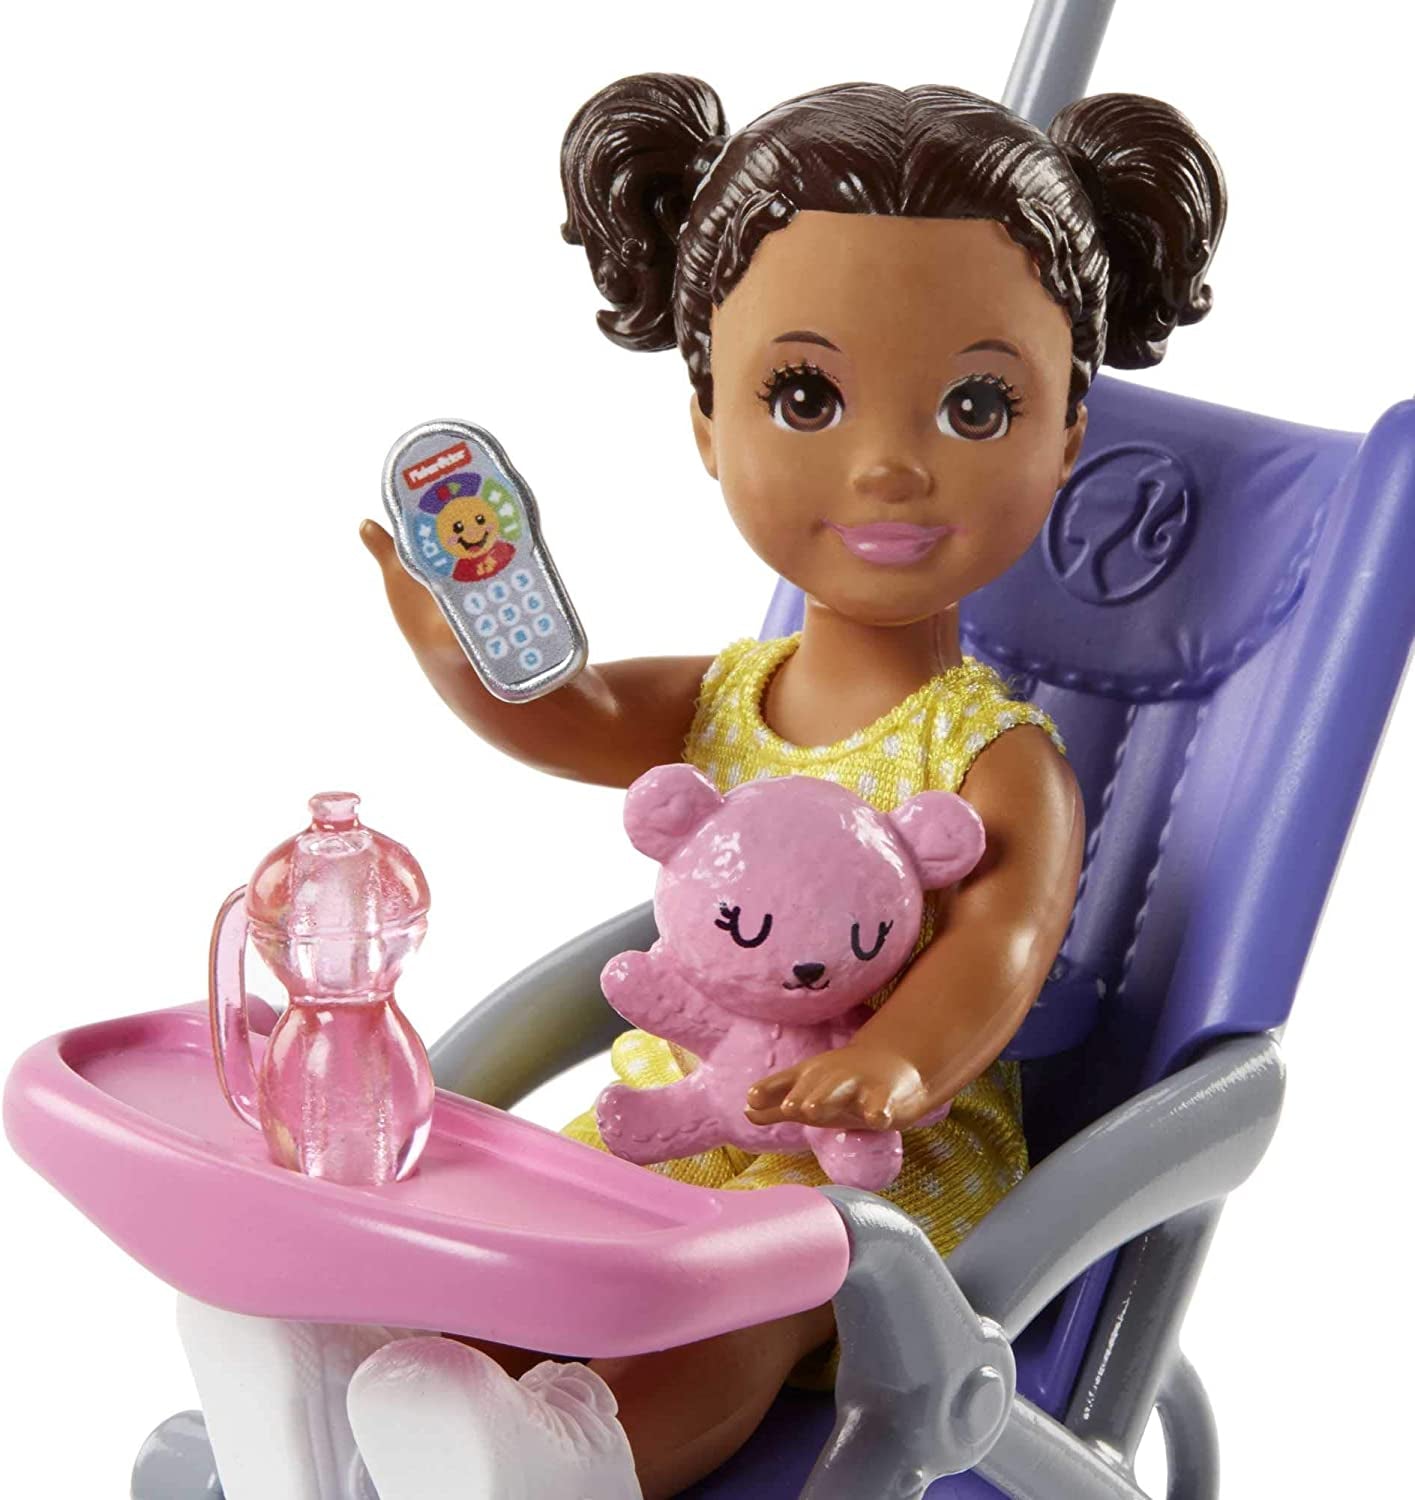 Barbie Babysitting Playset with Skipper Doll, Baby Doll, Bouncy Stroller and Themed Accessories for 3 to 7 Year Olds, FJB00 - Amazon Exclusive